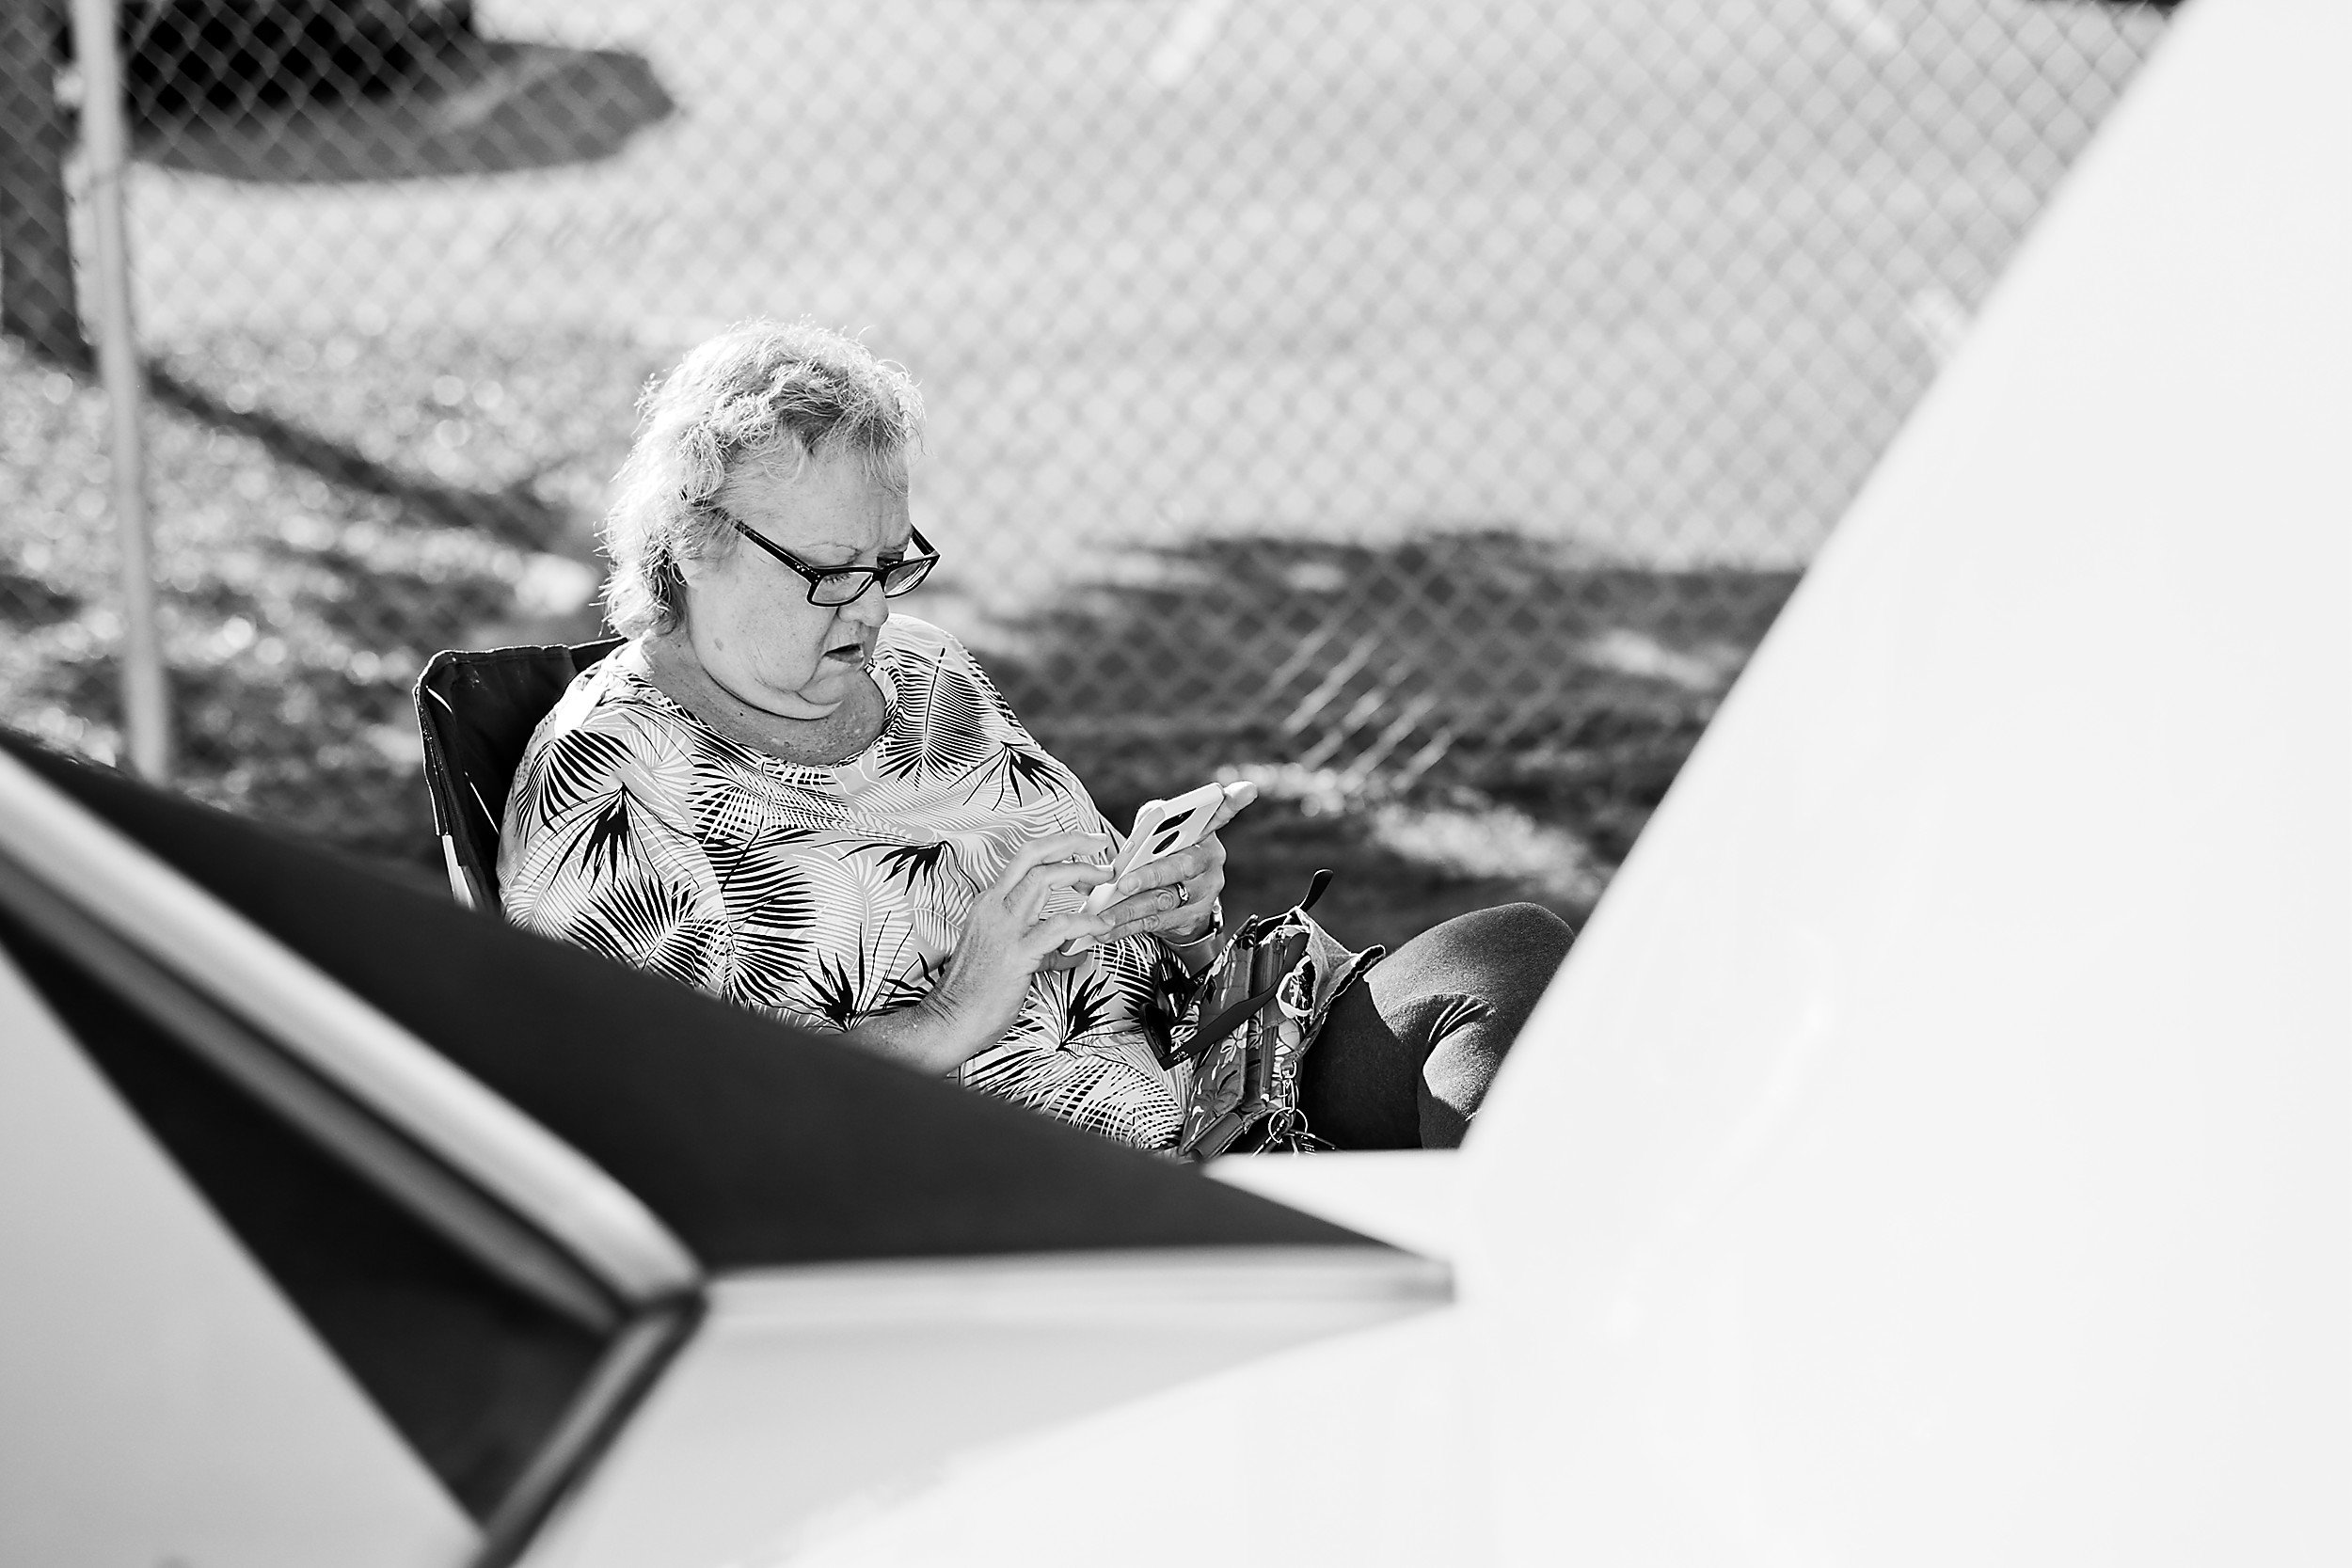  black and white image of a sitting woman reading at a car show 